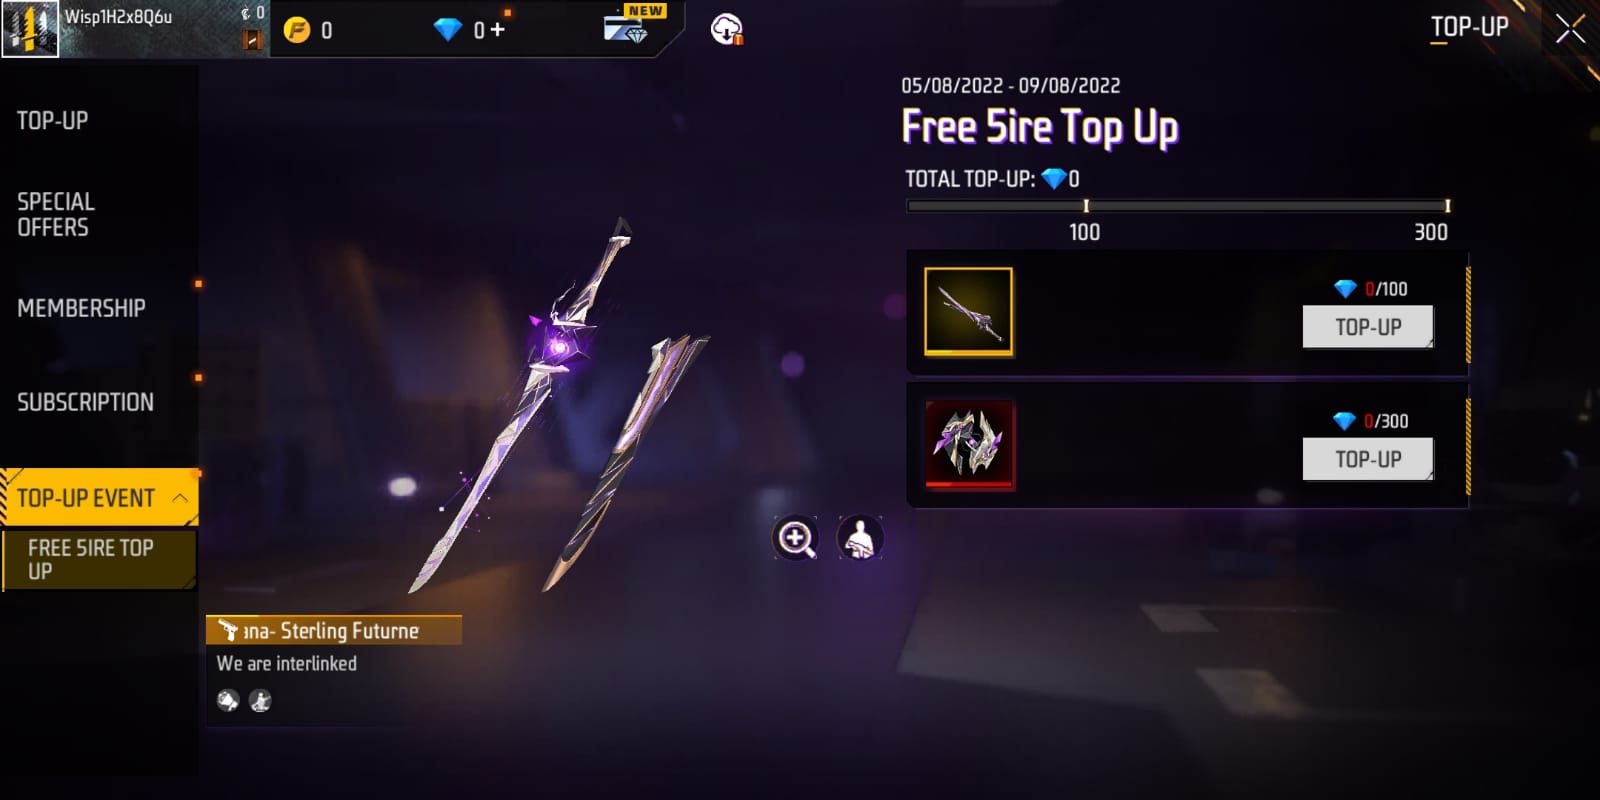 Free 5ire Top-up Event - Get Katana Sterling Futurnetic and Universe Shatter backpack by topping up diamonds. Check out the latest Free Fire MAX Top-up event